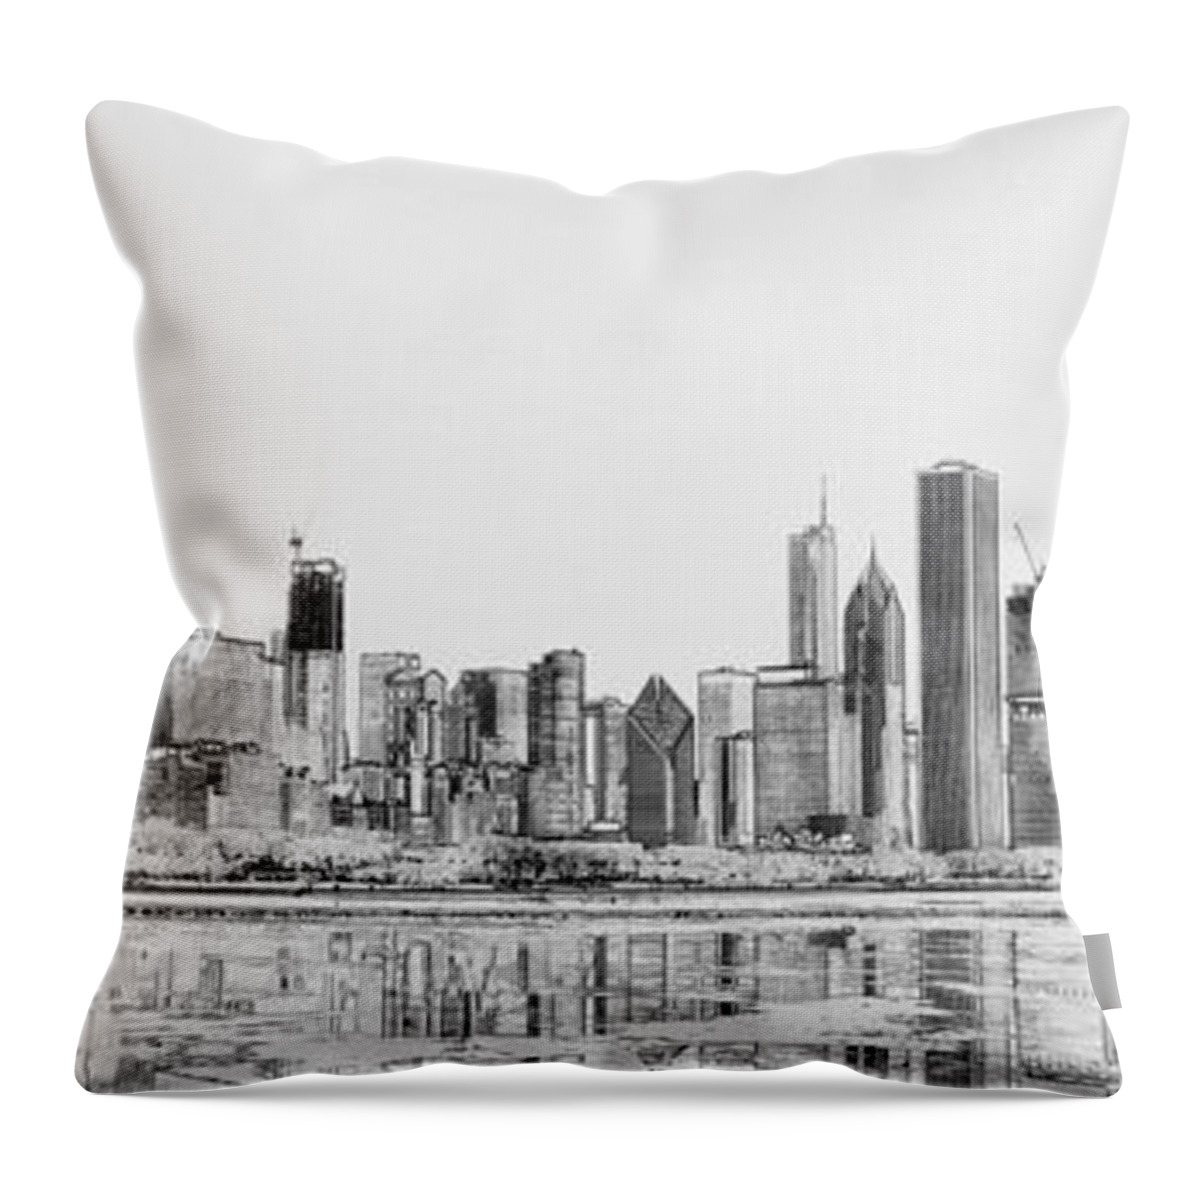 Chicago Panorama Throw Pillow featuring the digital art Chicago Panorama by Dejan Jovanovic